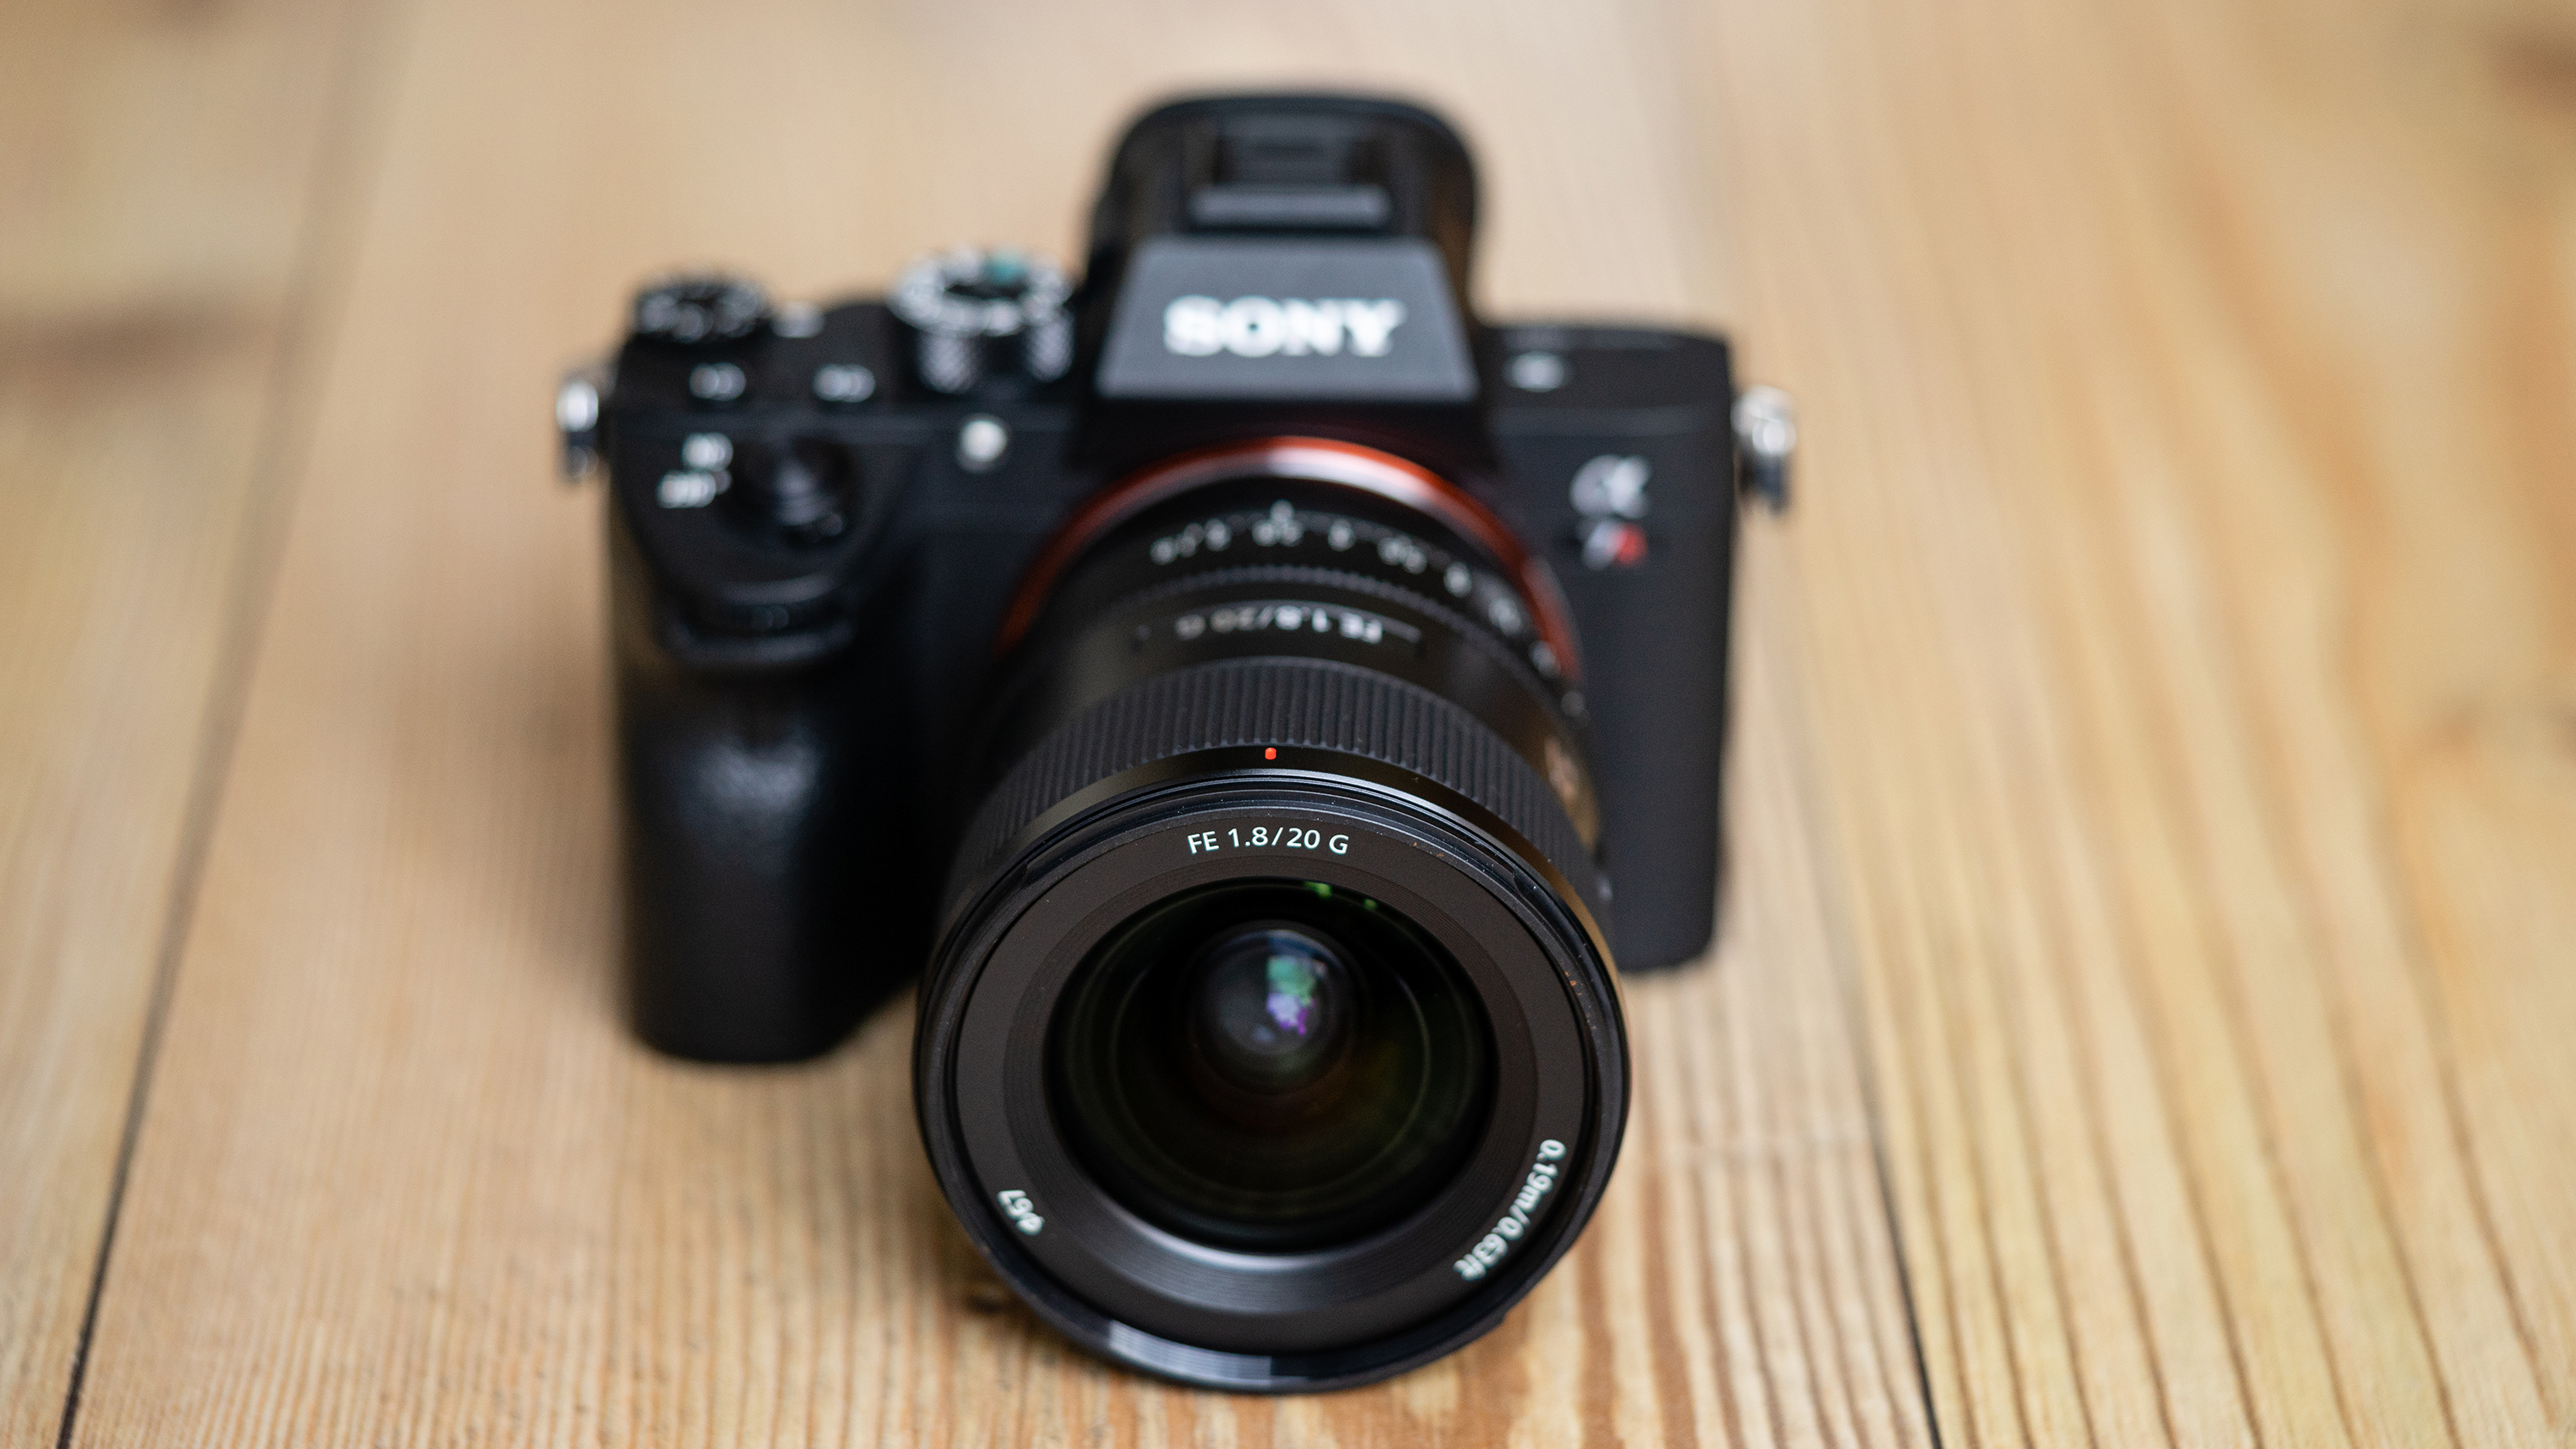 Sony camera fans get superb new 20mm f/1.8 prime lens – read our full review